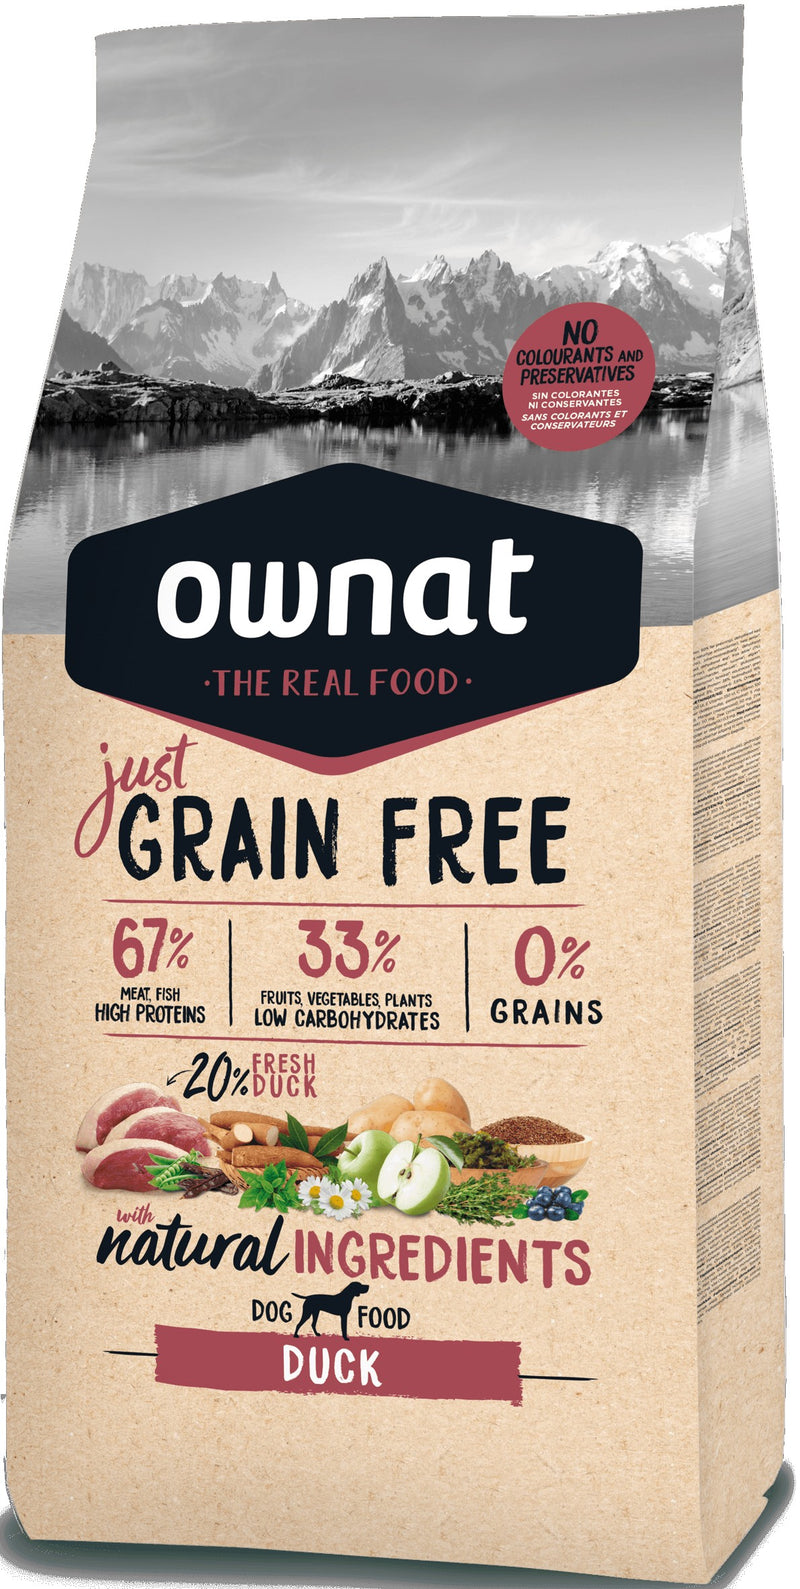 OWNAT JUST GRAIN FREE - CROQUETTES CHIENS ADULTES - Canard OWNAT